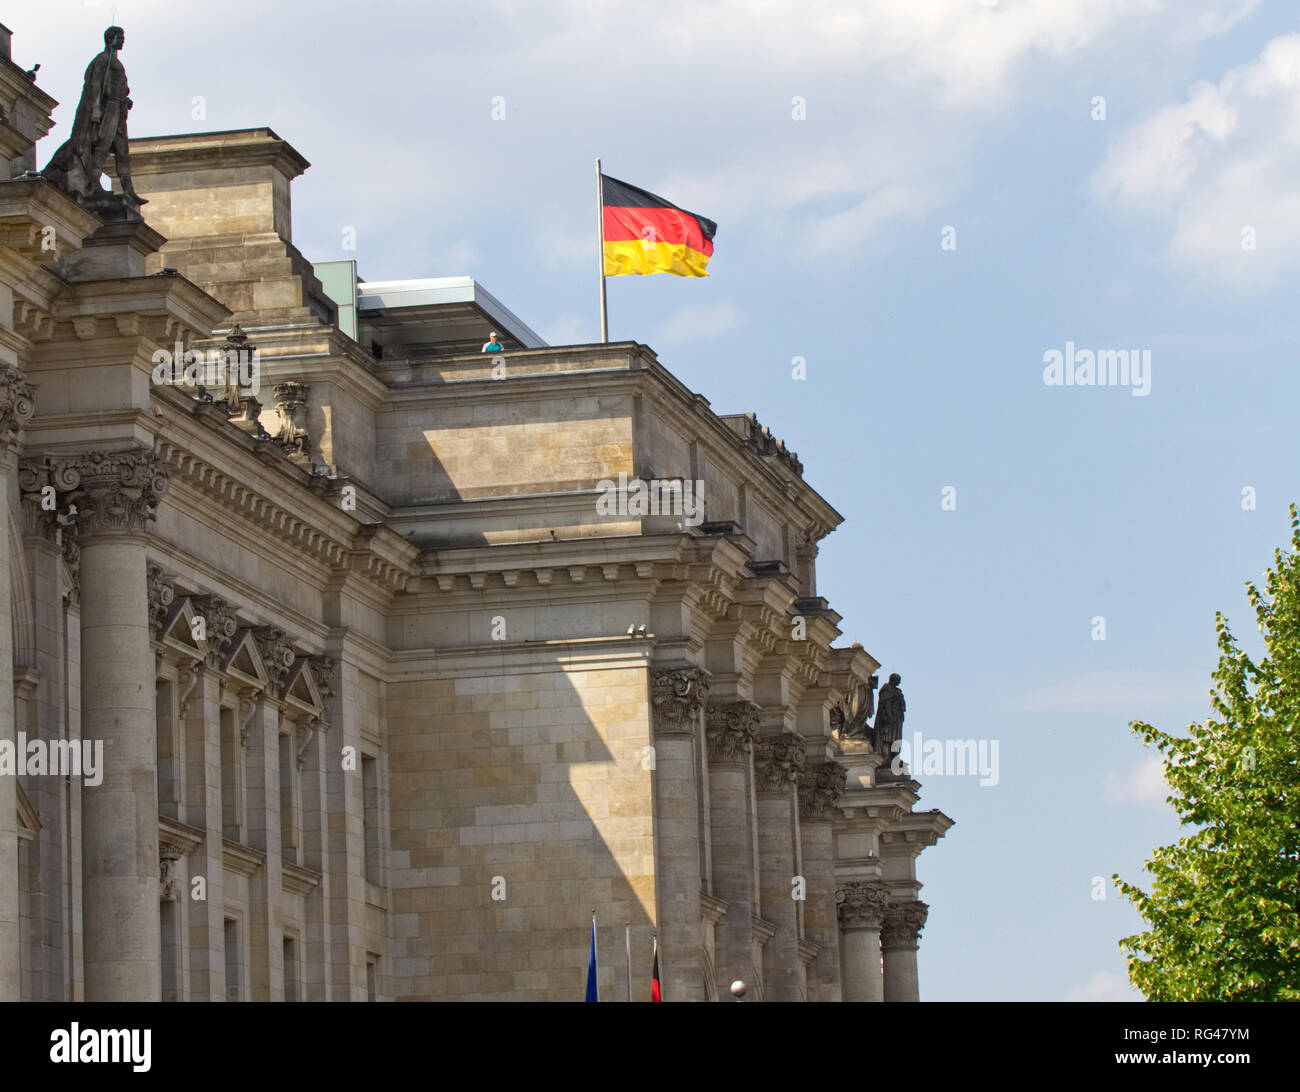 July 5, 2018- Berlin, Germany: A german flag flies atop the historic edifice of the Reichstag building in Germany Stock Photo